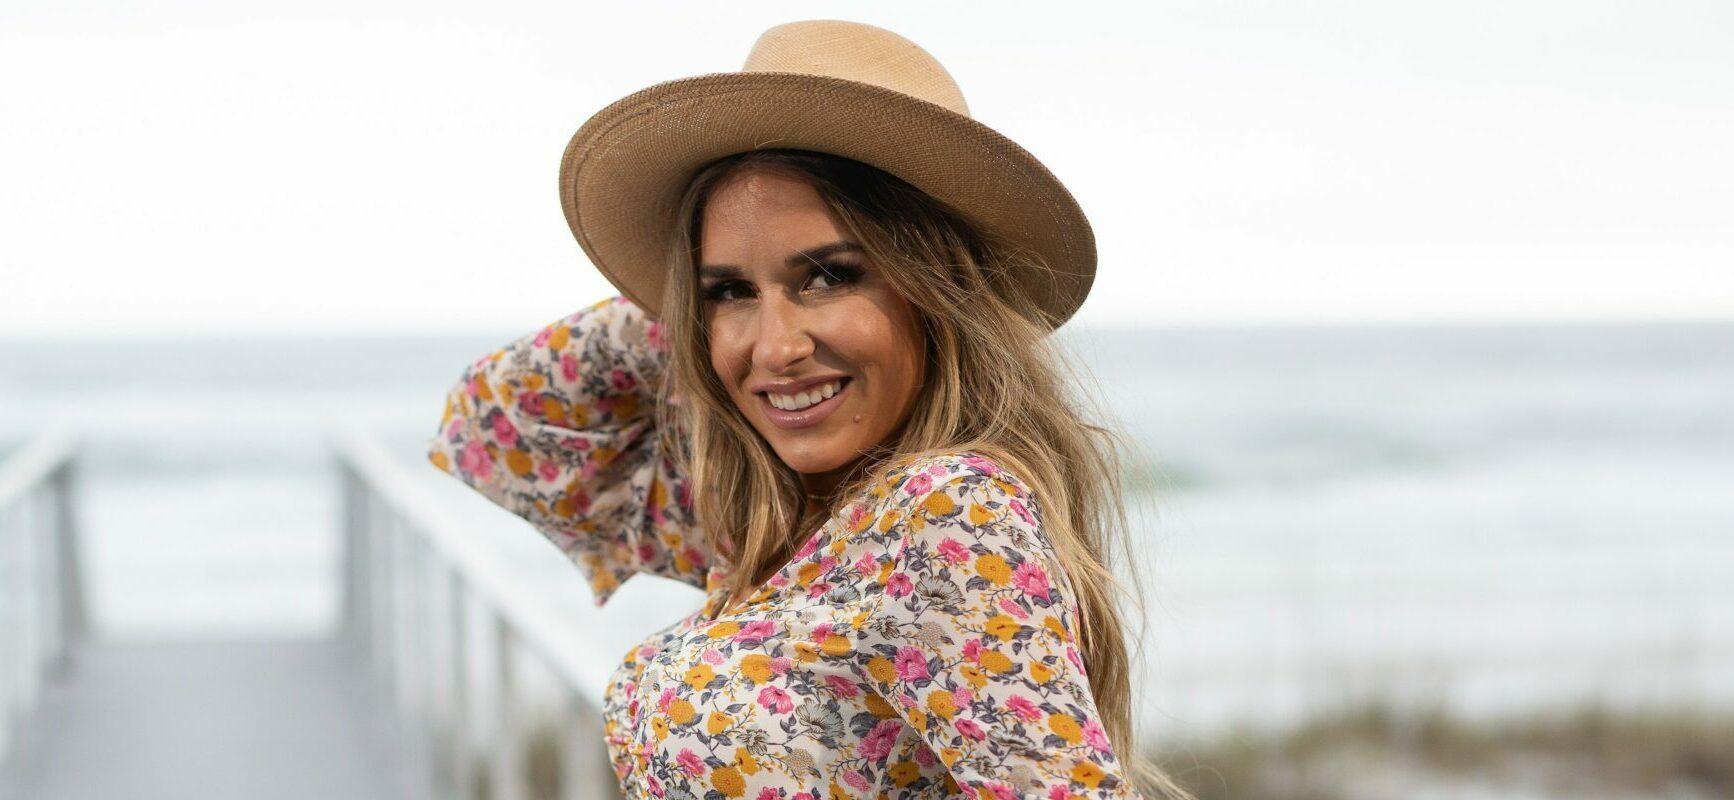 Mother-of-three Jessie James Decker shows off 25lbs weight loss in Daisy Dukes and crop top